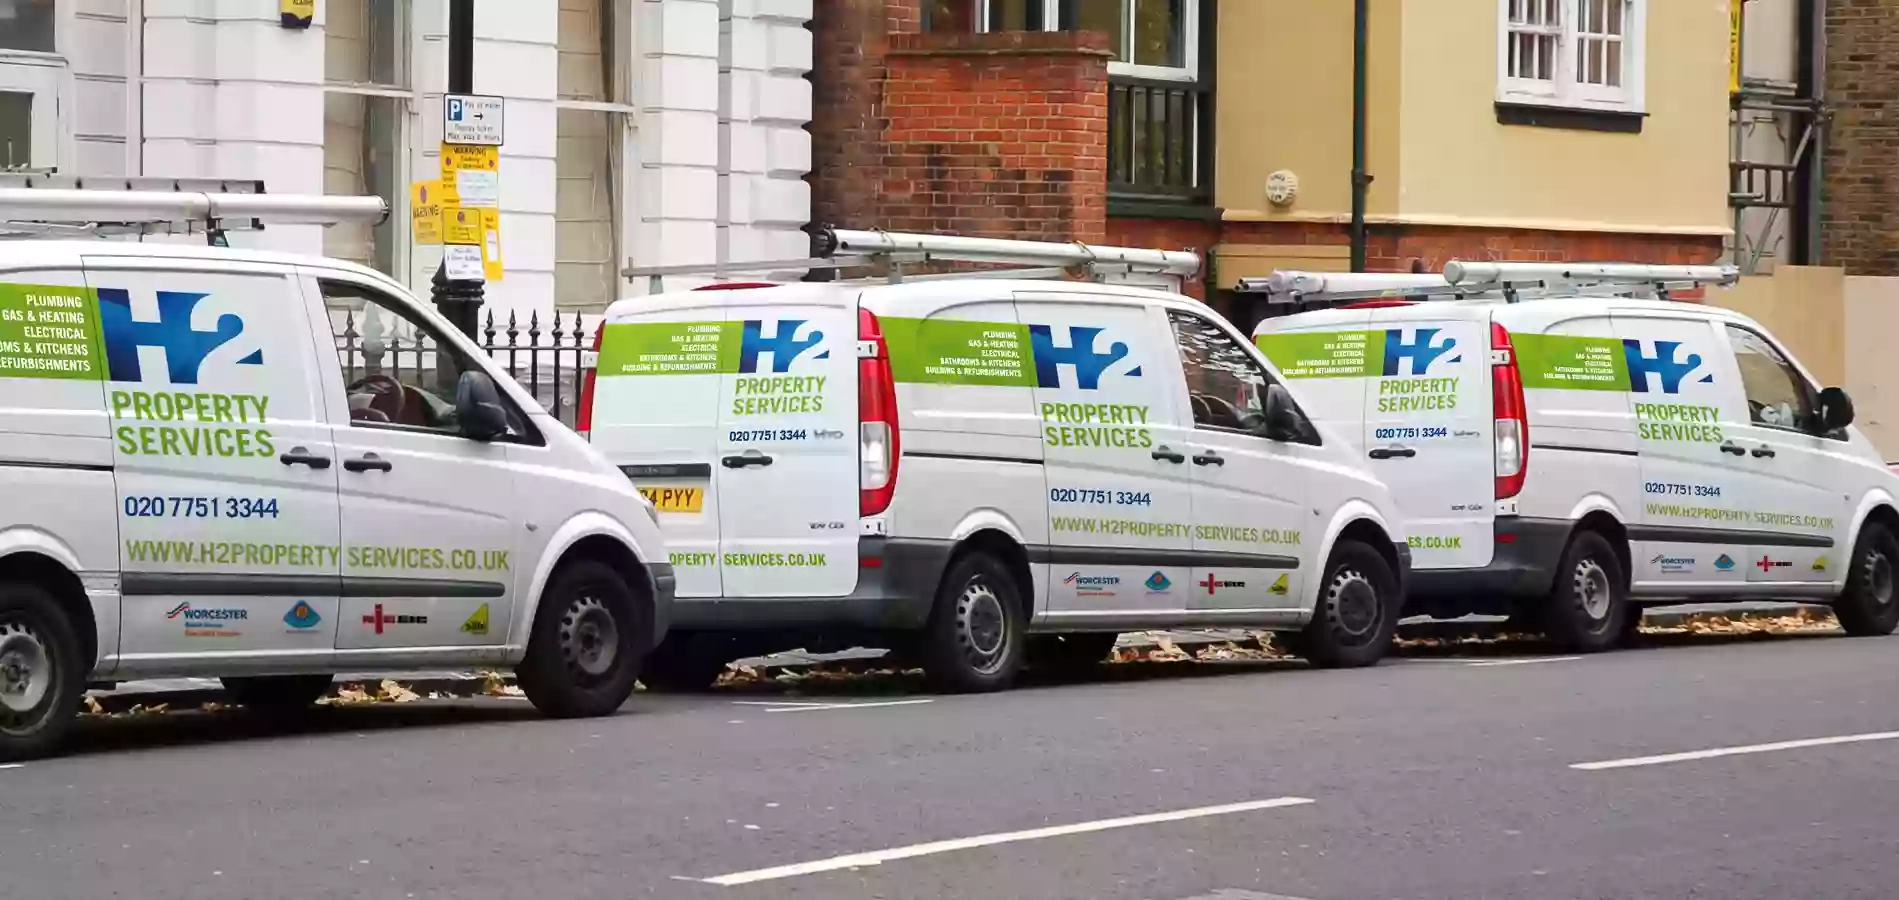 H2 Property Services